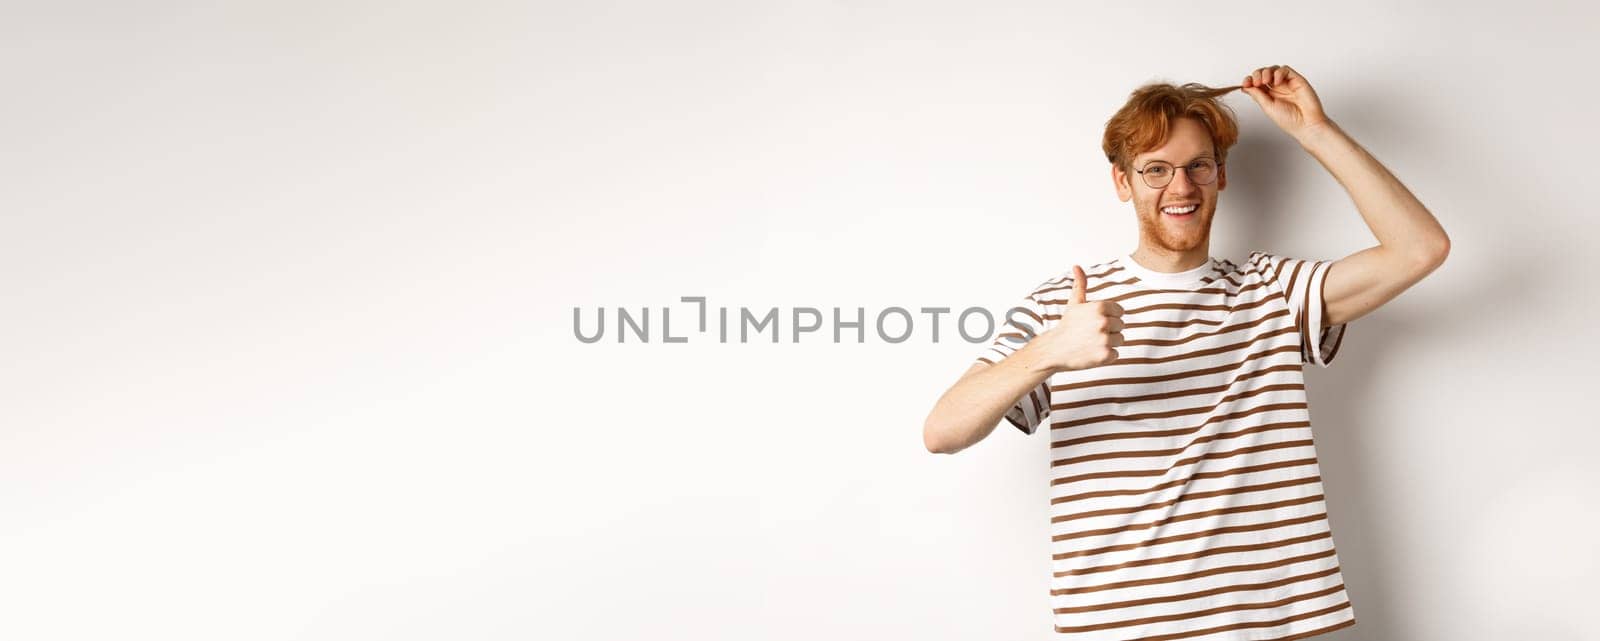 Cheerful redhead guy showing thumb-up and his red hair strand, like new color, standing over white background.